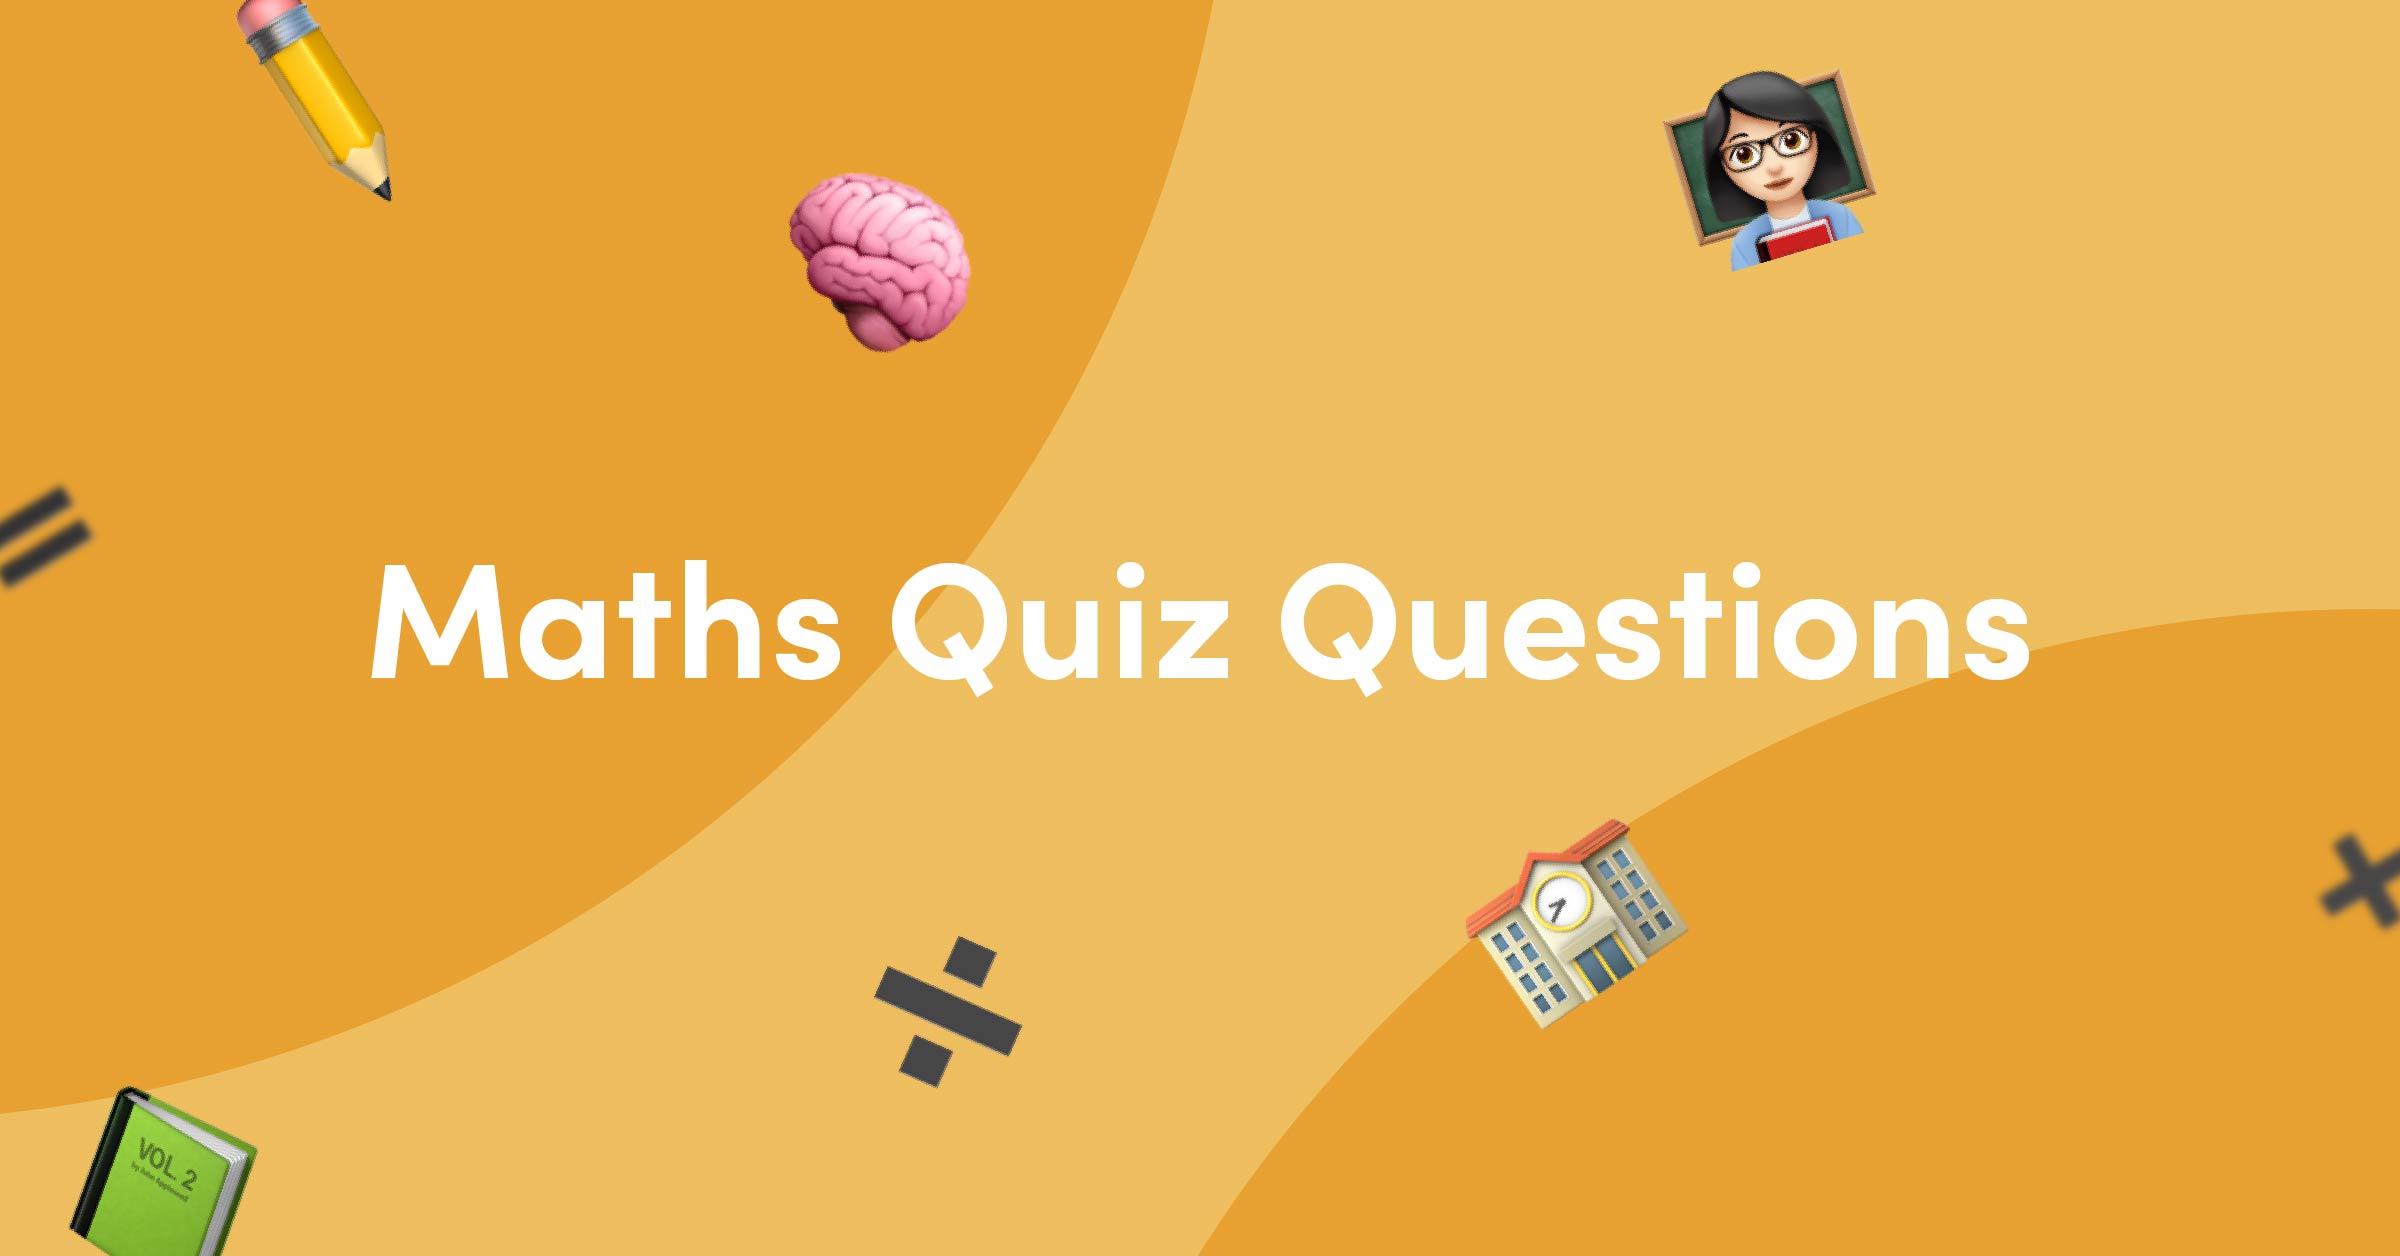 I Challenge You To Score Above 9/12 In This Increasingly Difficult Quiz